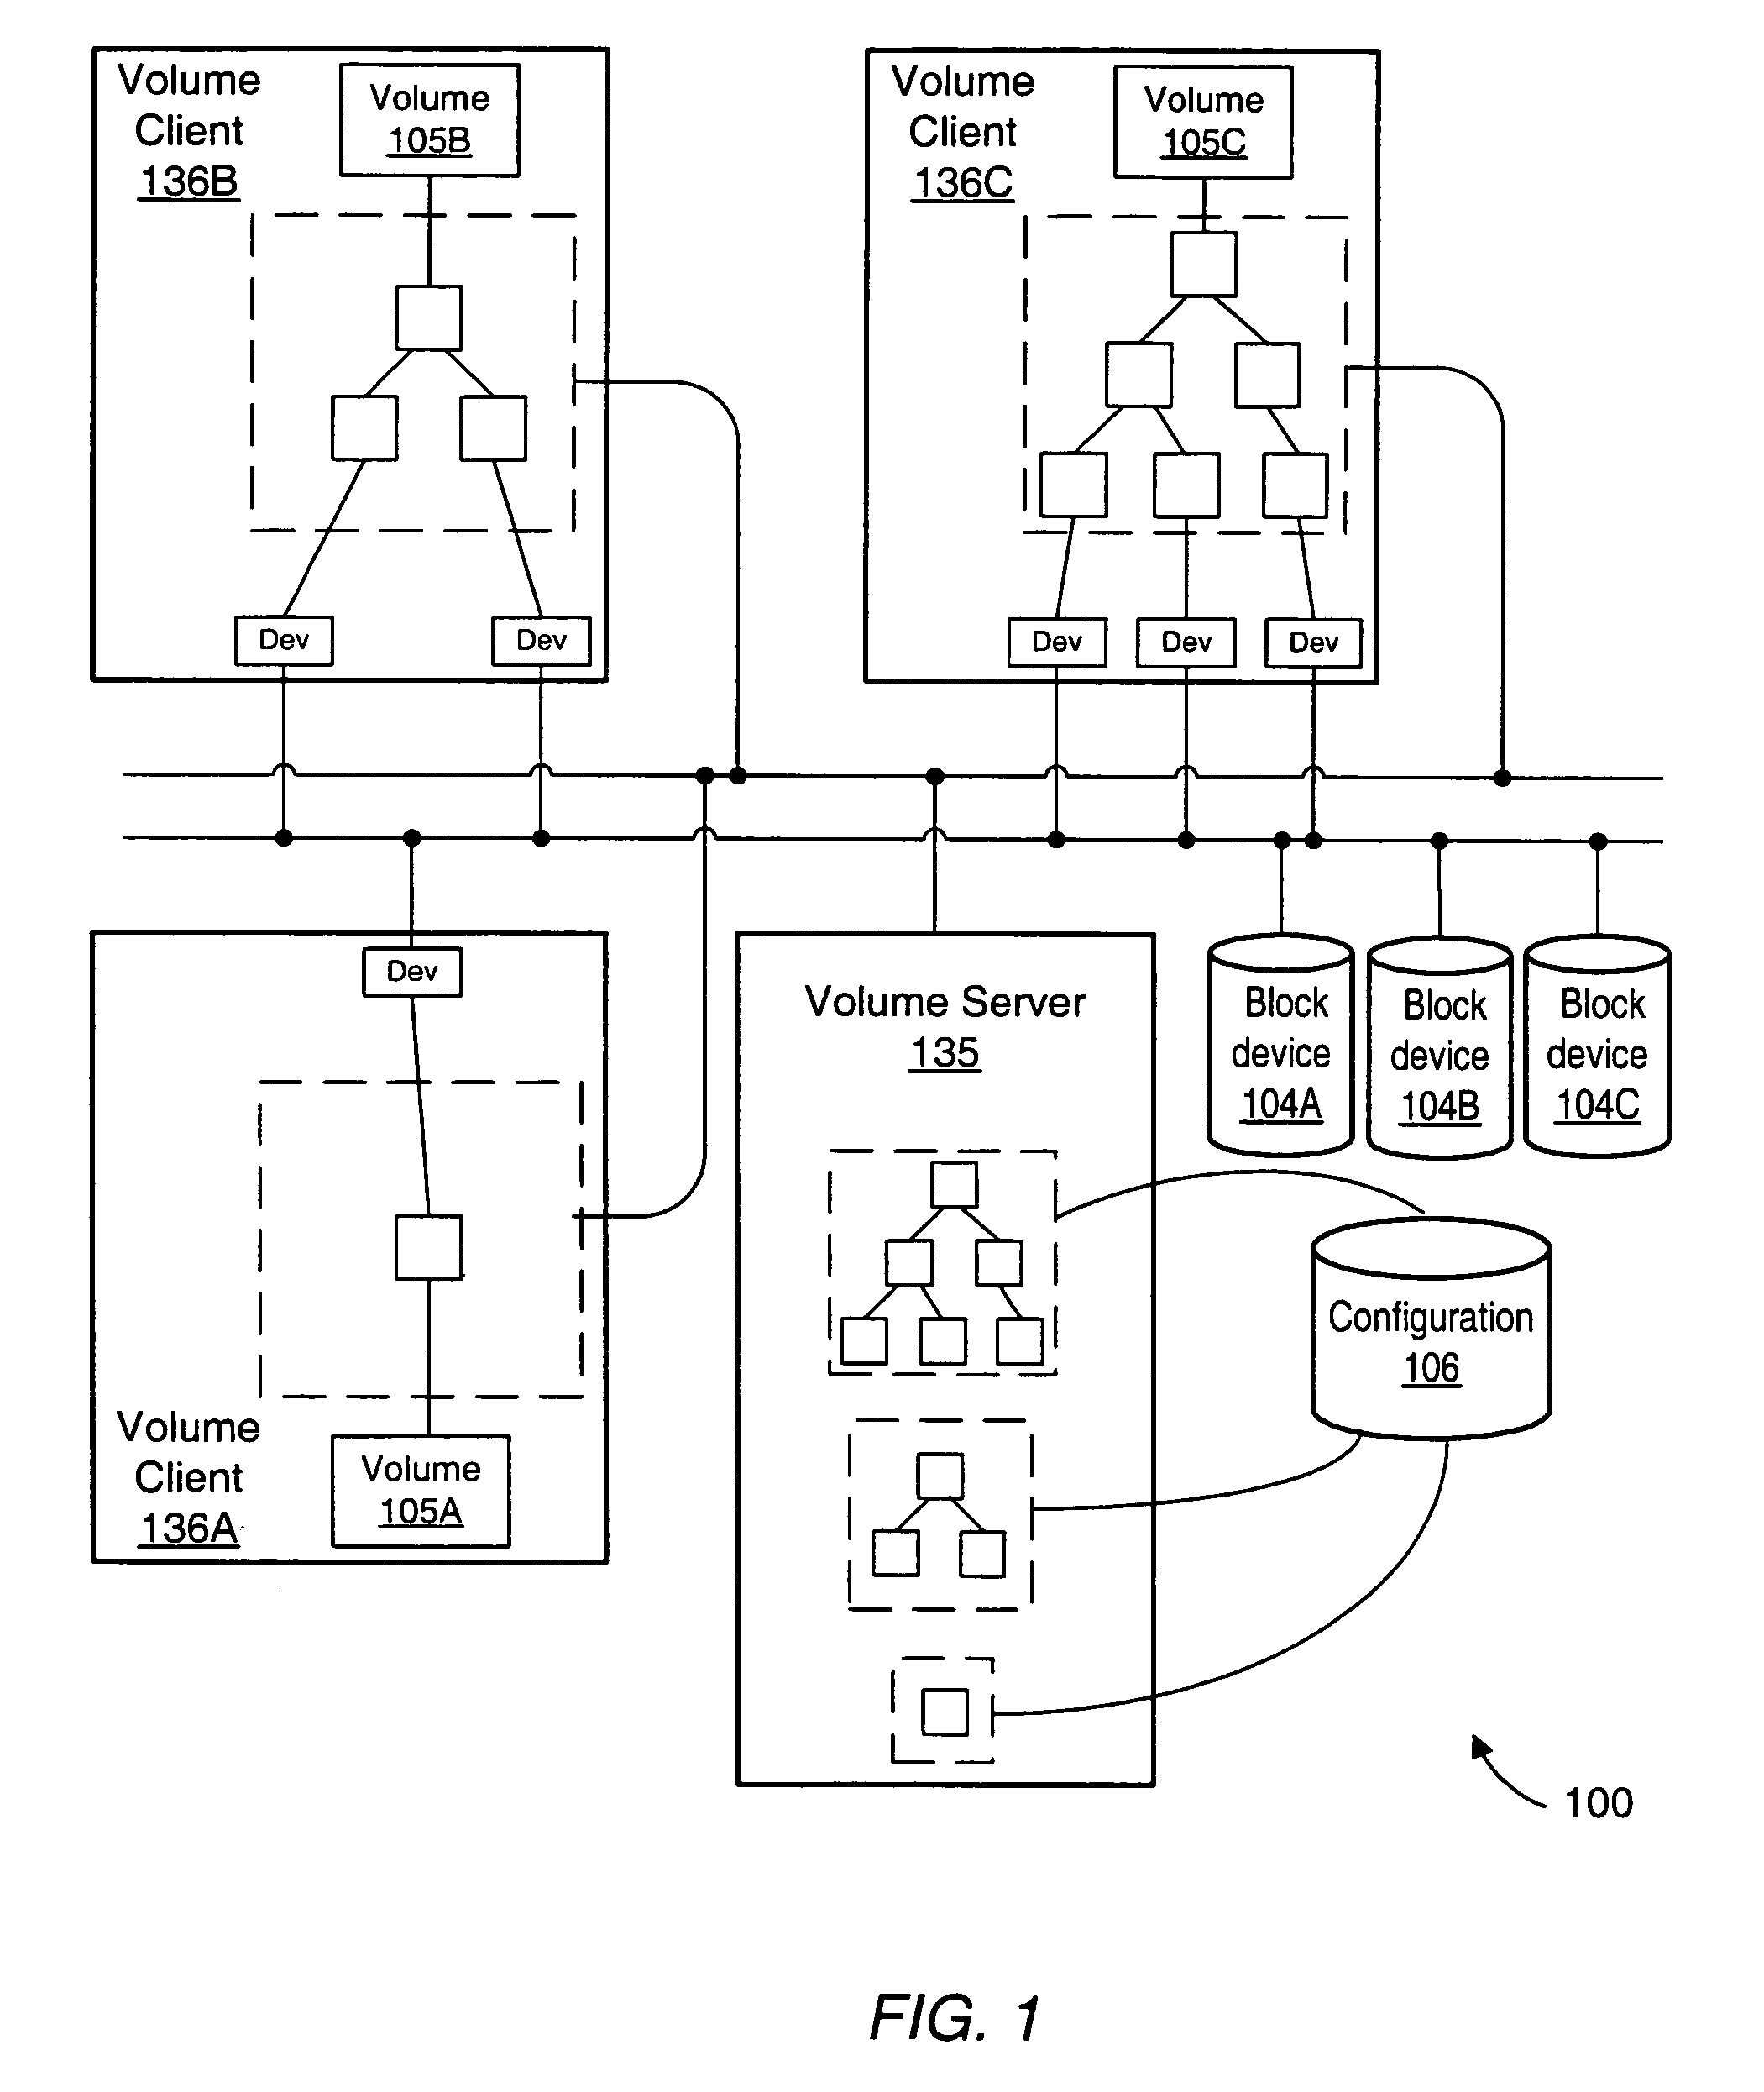 System and method for performing snapshots in a storage environment employing distributed block virtualization